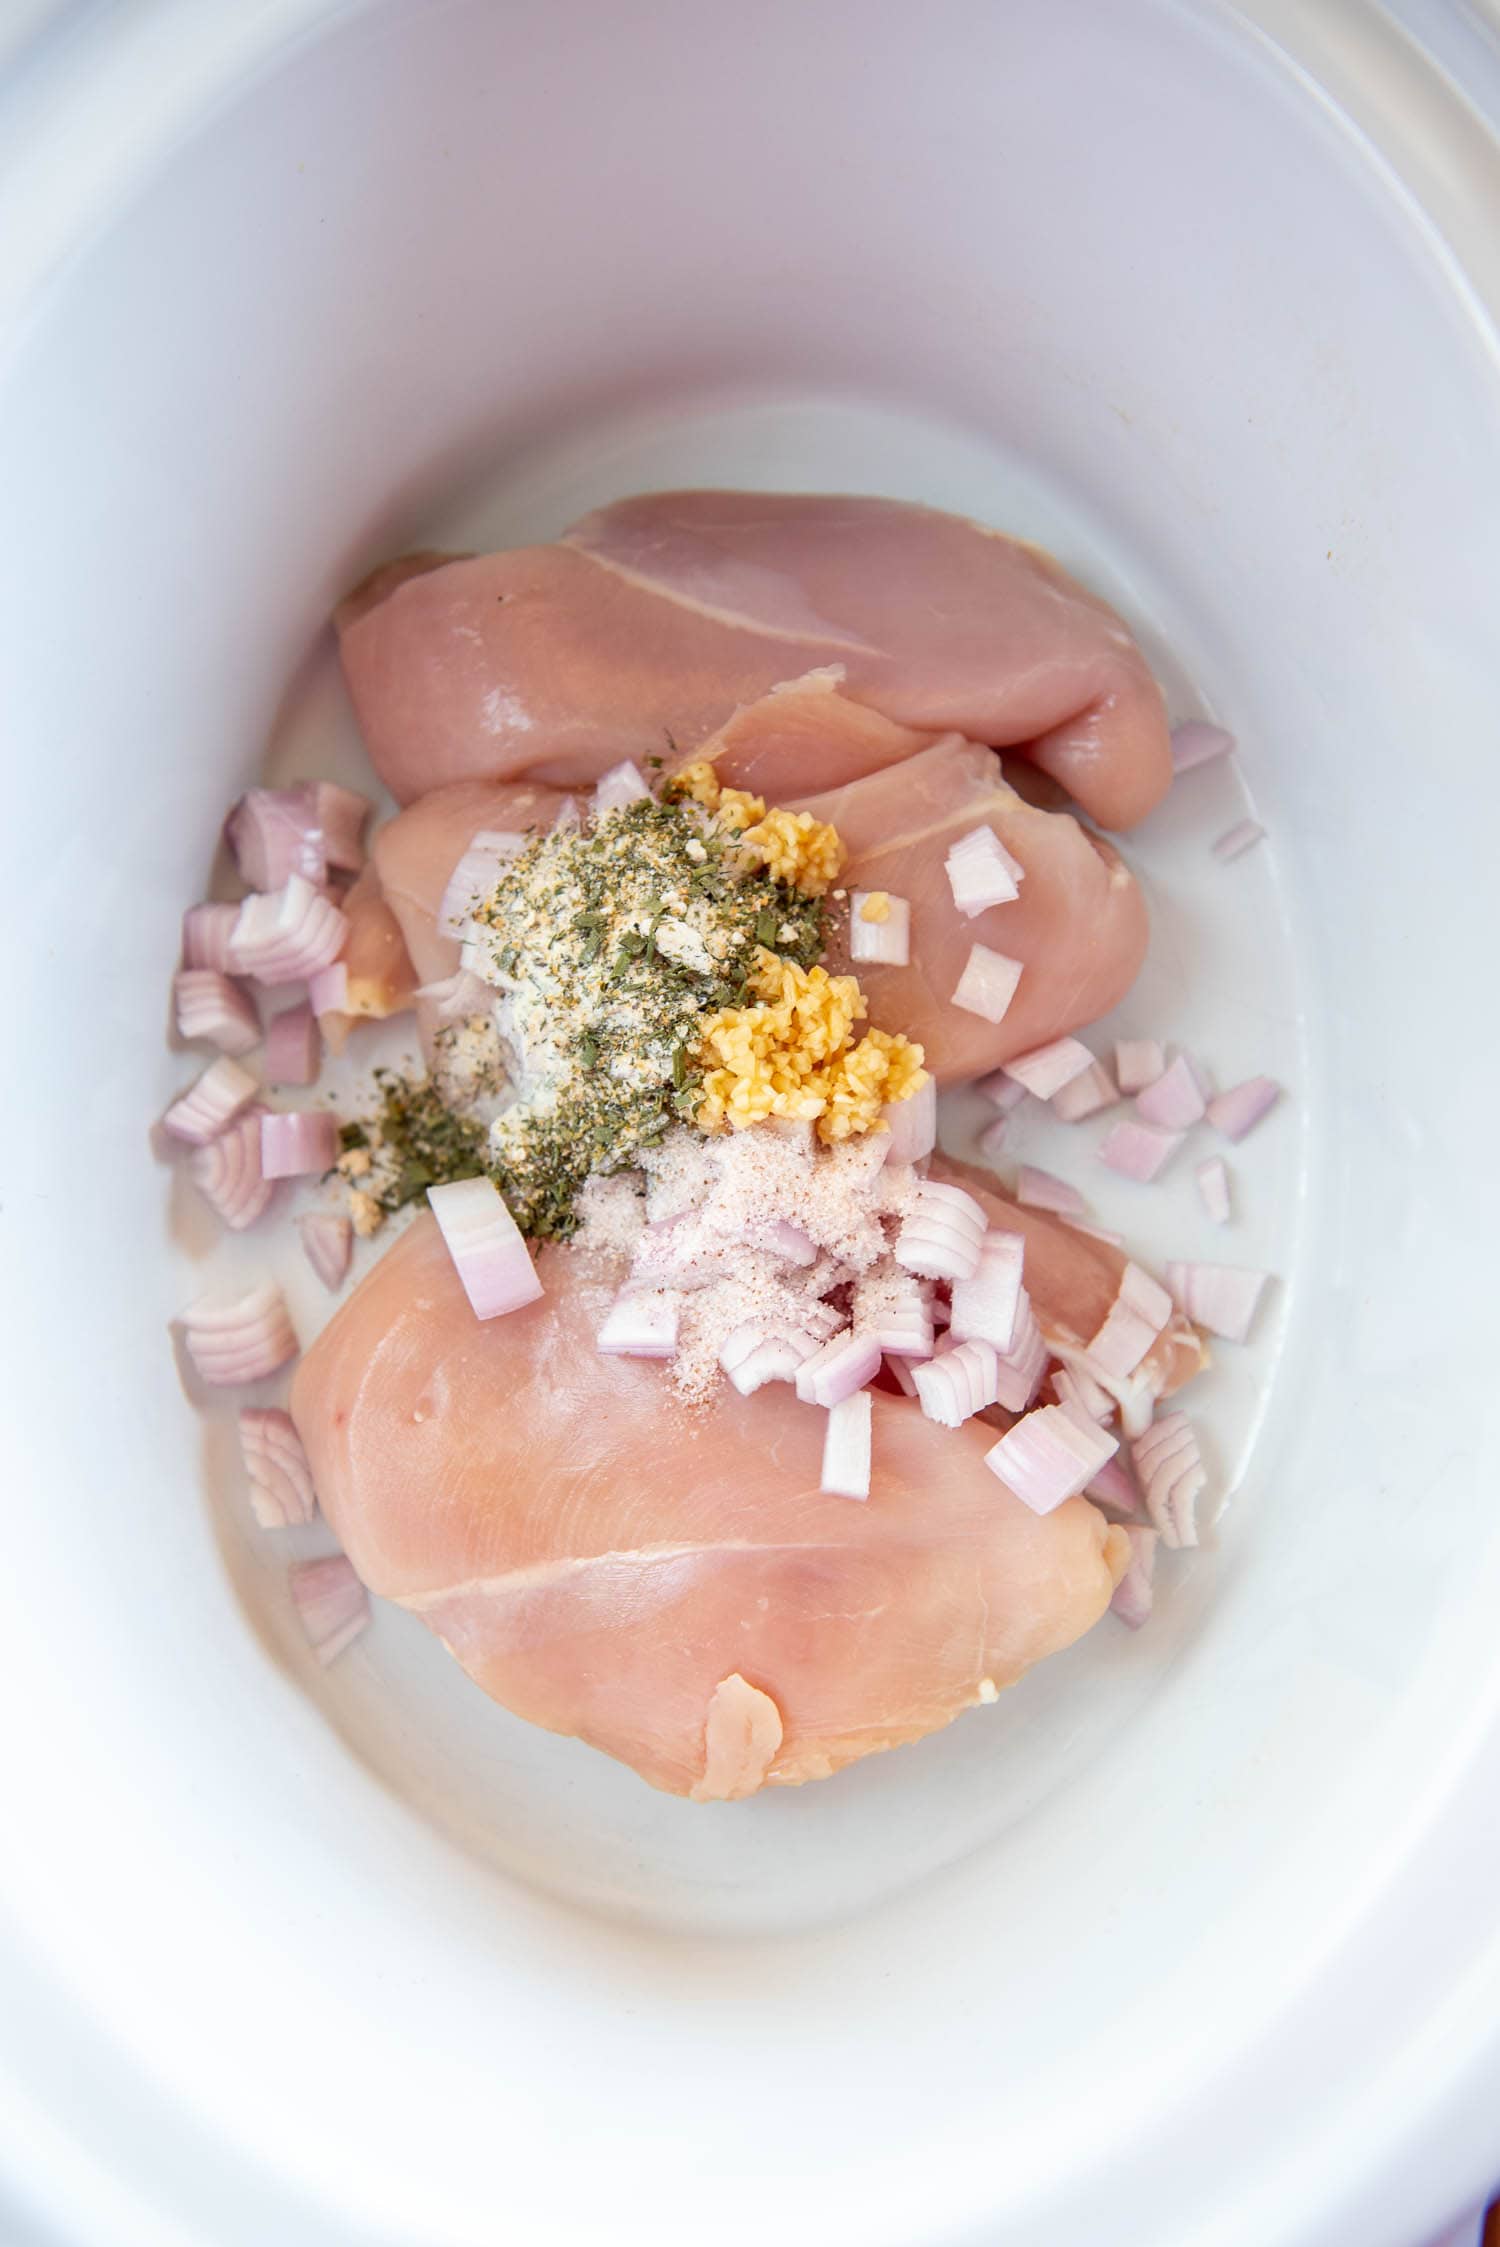 raw chicken breasts inside of white slow cooker down with chopped red onions, small scoop of minced garlic, and green and white spiced on top